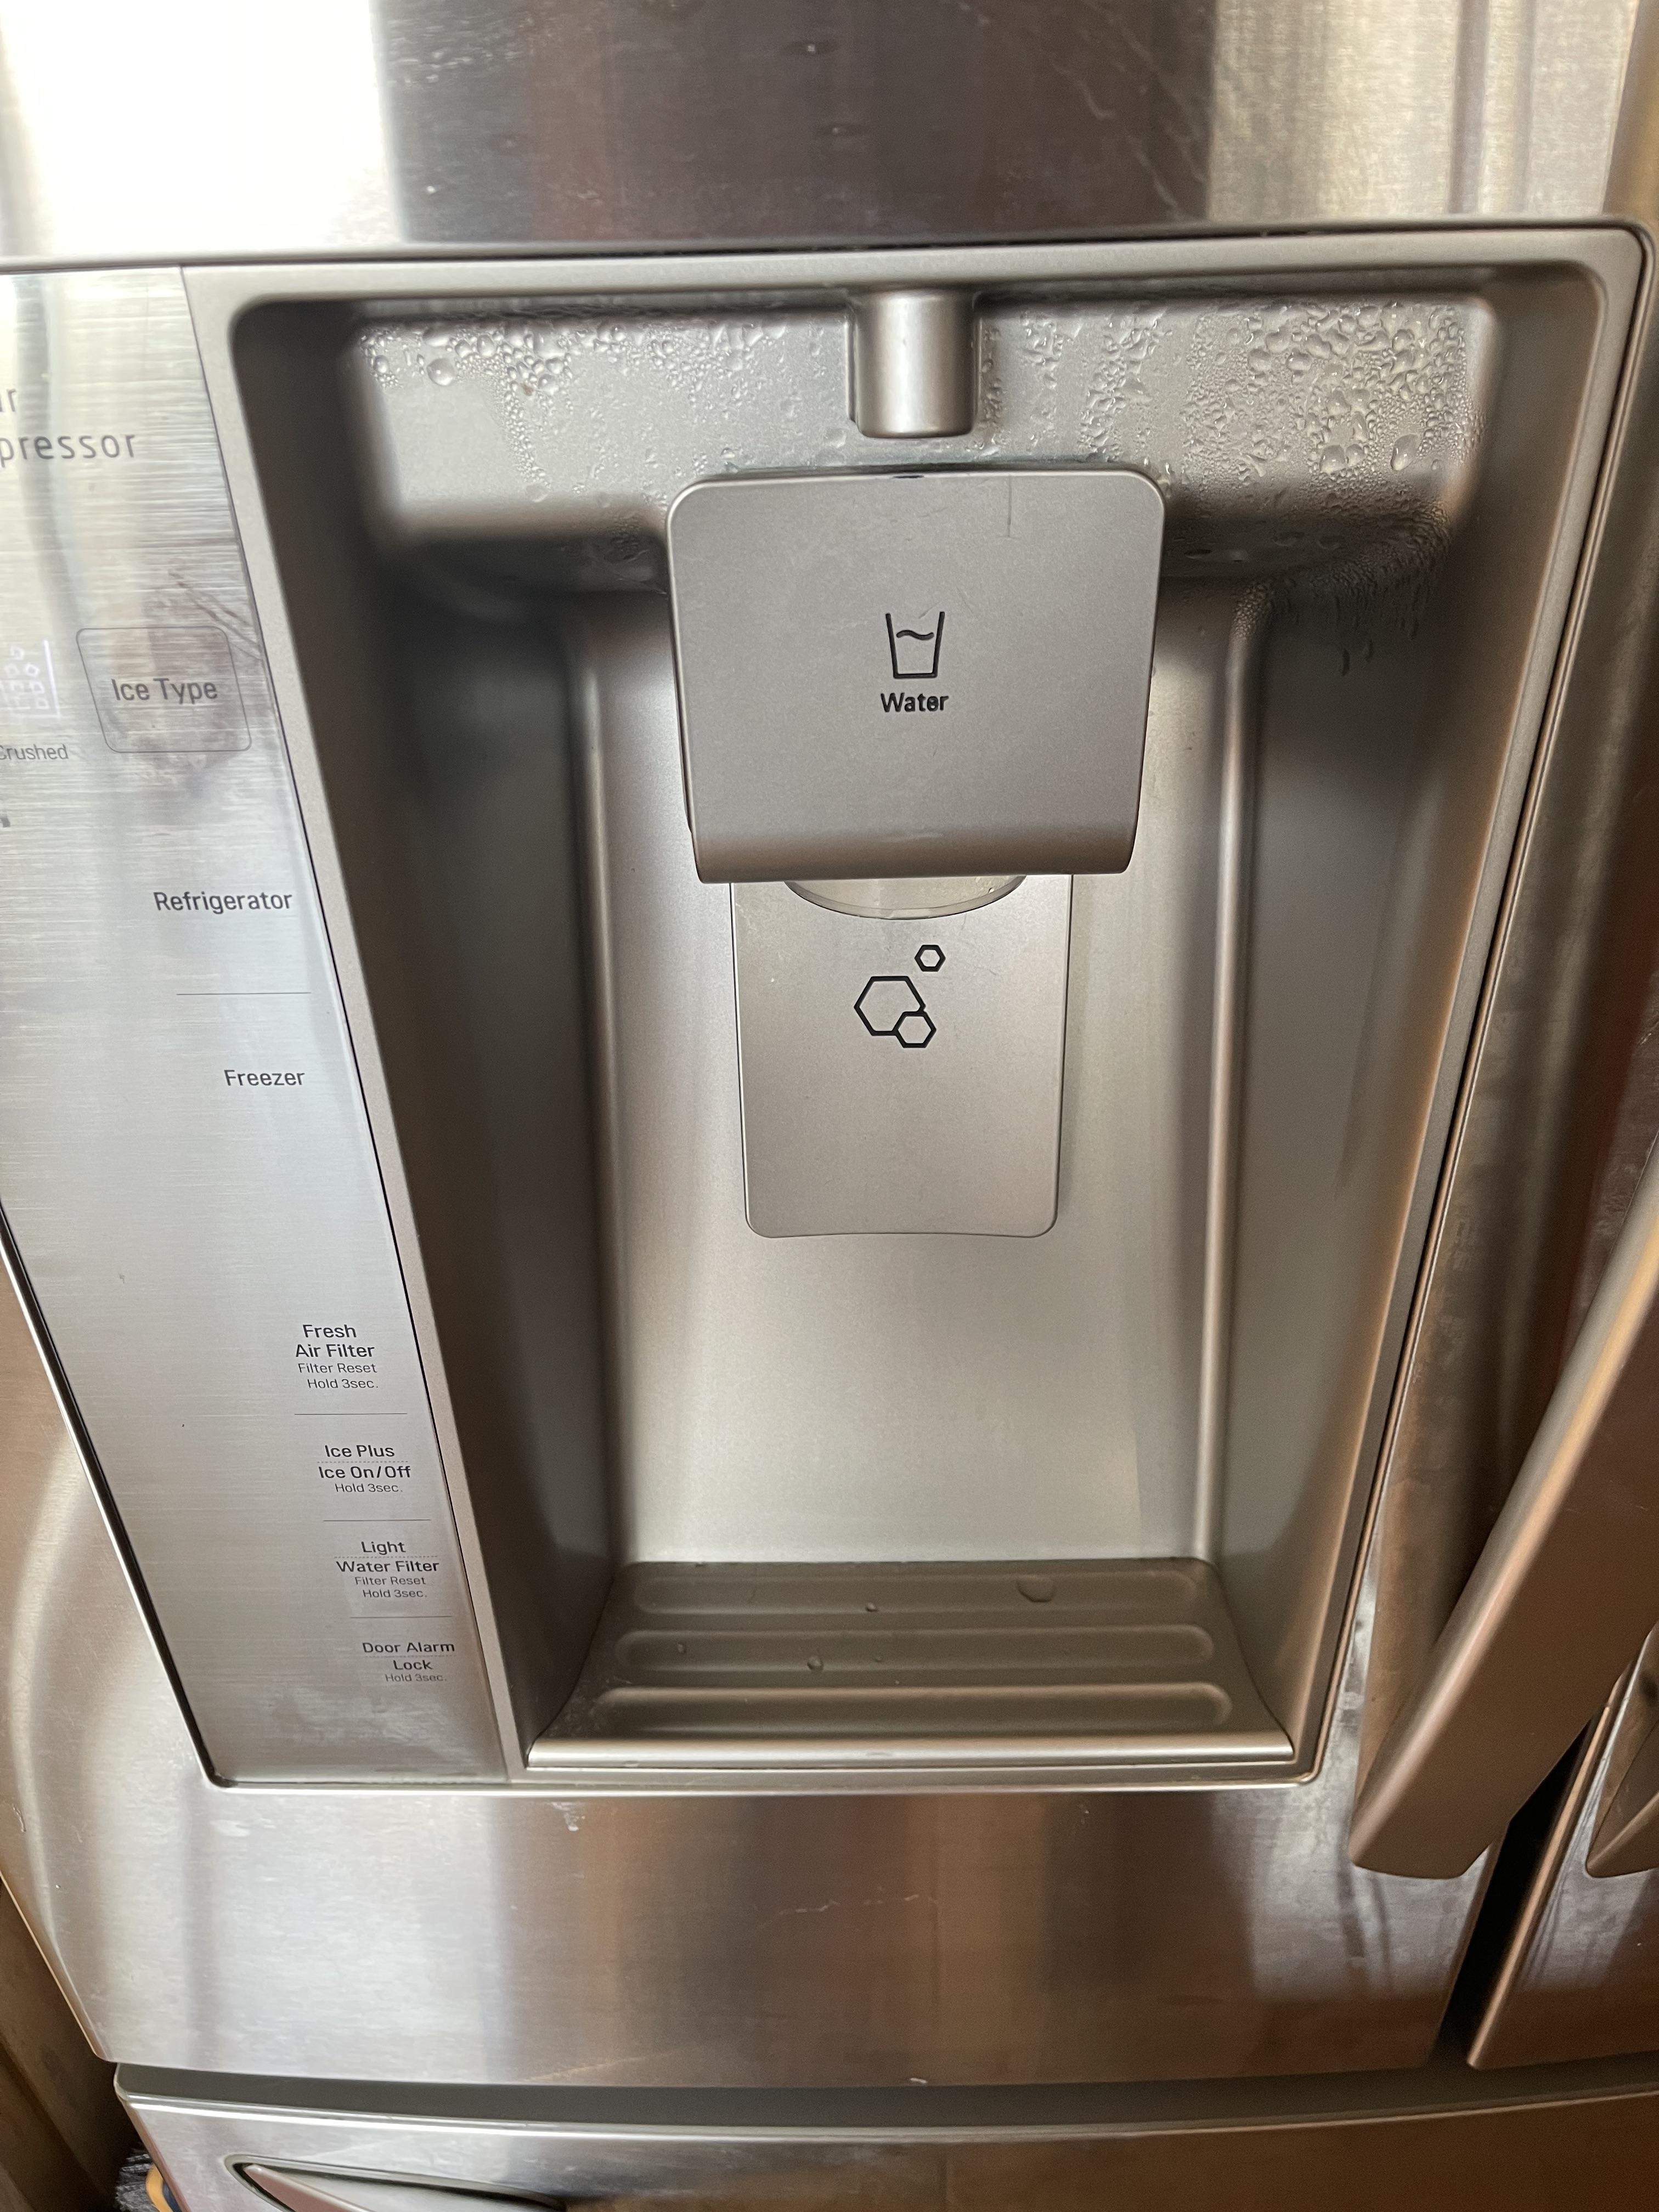 A refrigerator water and ice dispenser with clearly marked buttons